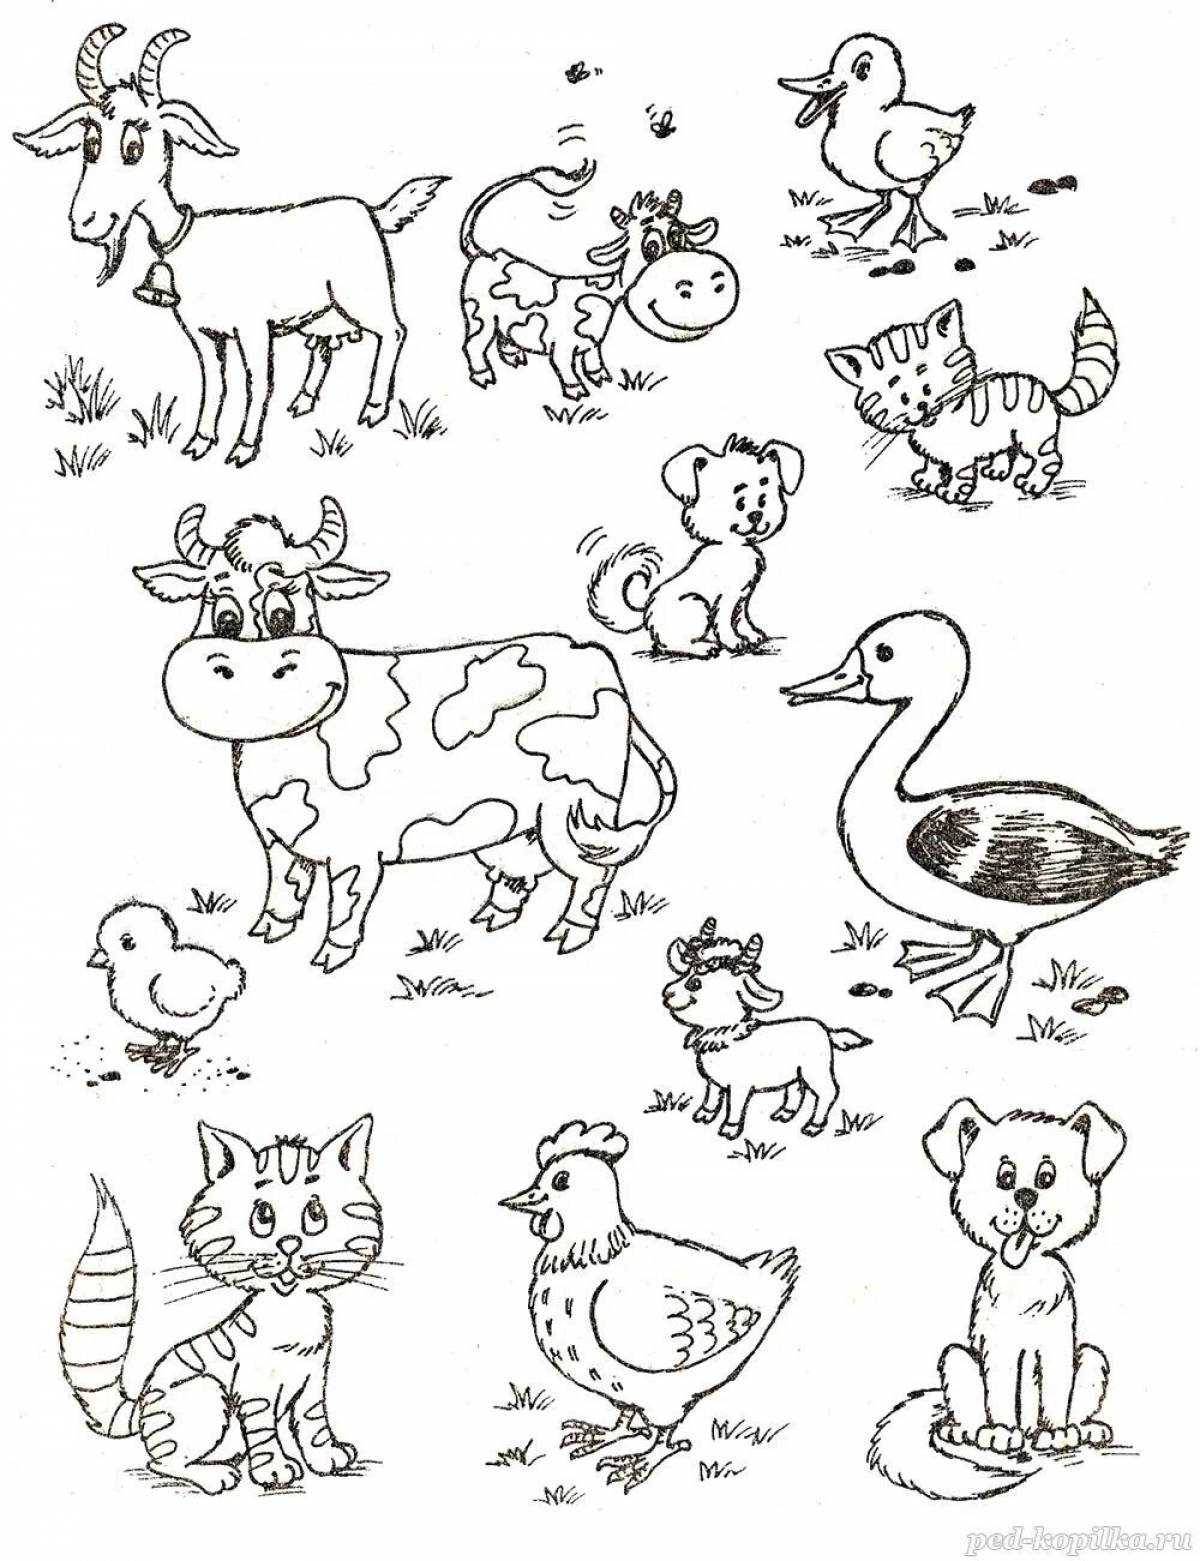 Bright pet coloring page